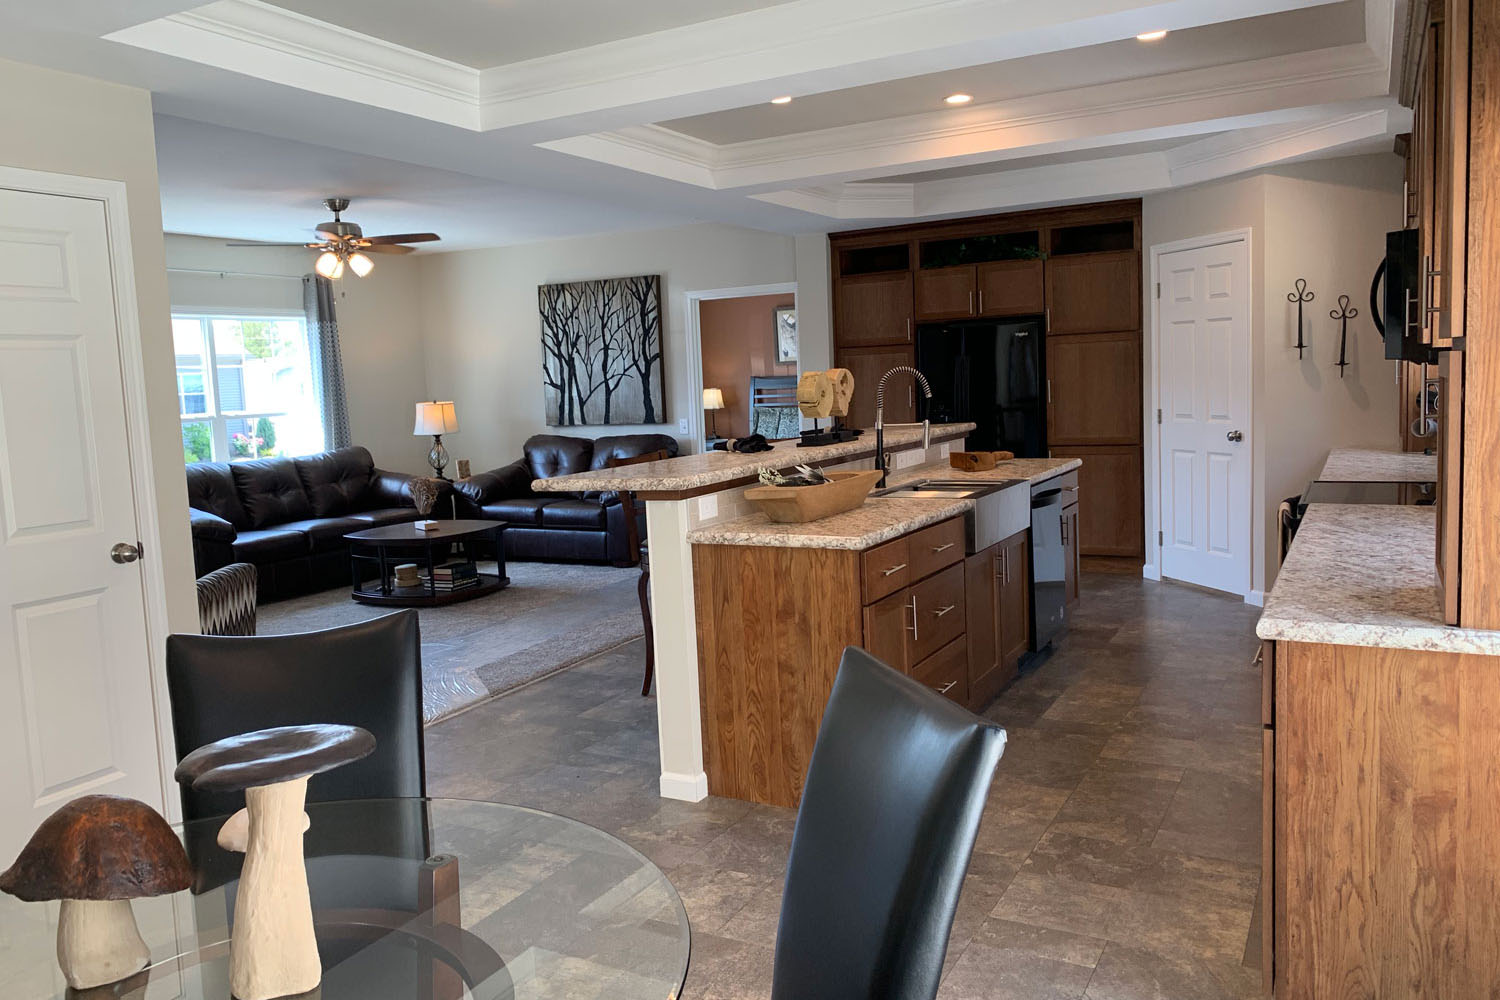 Top West Virginia Modular Home Builder Announces New Ranch Model Home Display